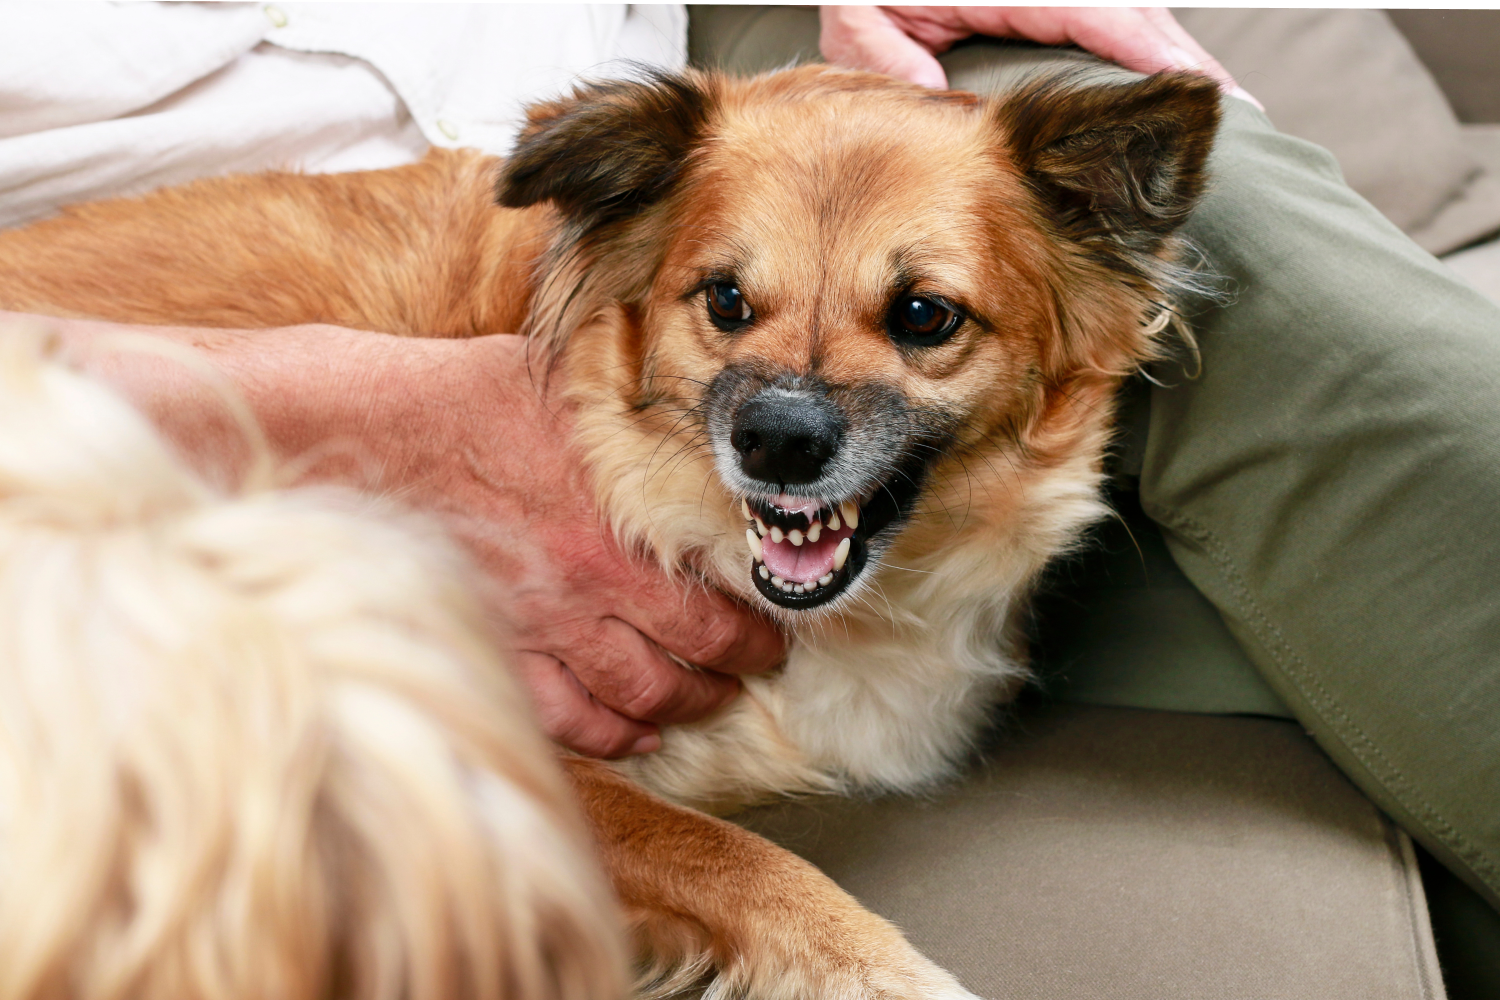 Dog Growling: Is It a Sign of Aggression?